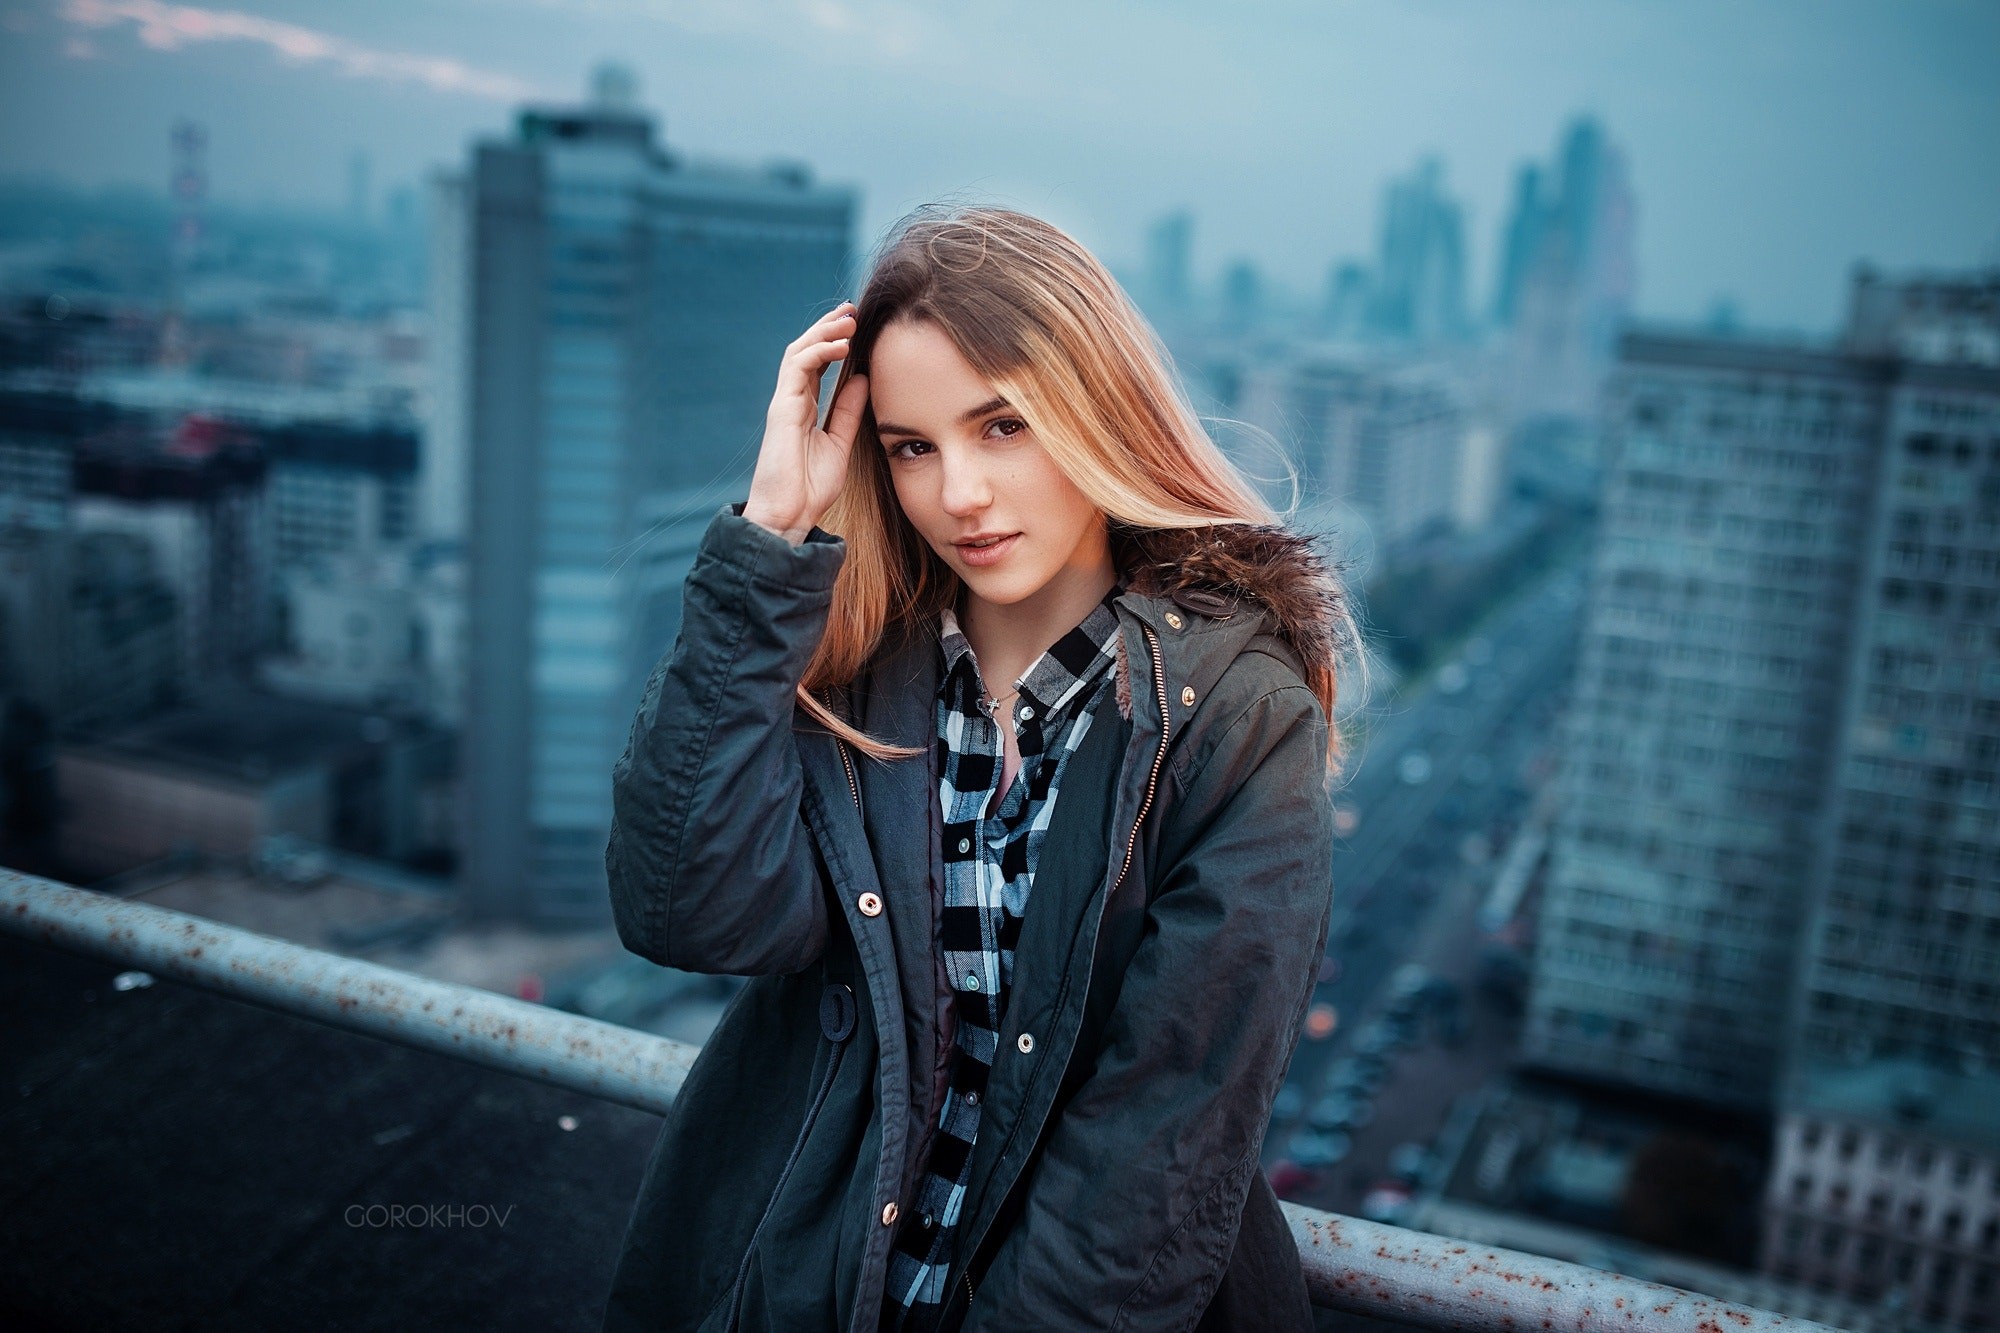 People 2000x1333 women blonde portrait cityscape women outdoors shirt depth of field Ivan Gorokhov Maryana Ro jacket grey jacket touching hair brown eyes ombre hair Moscow plaid shirt Russia